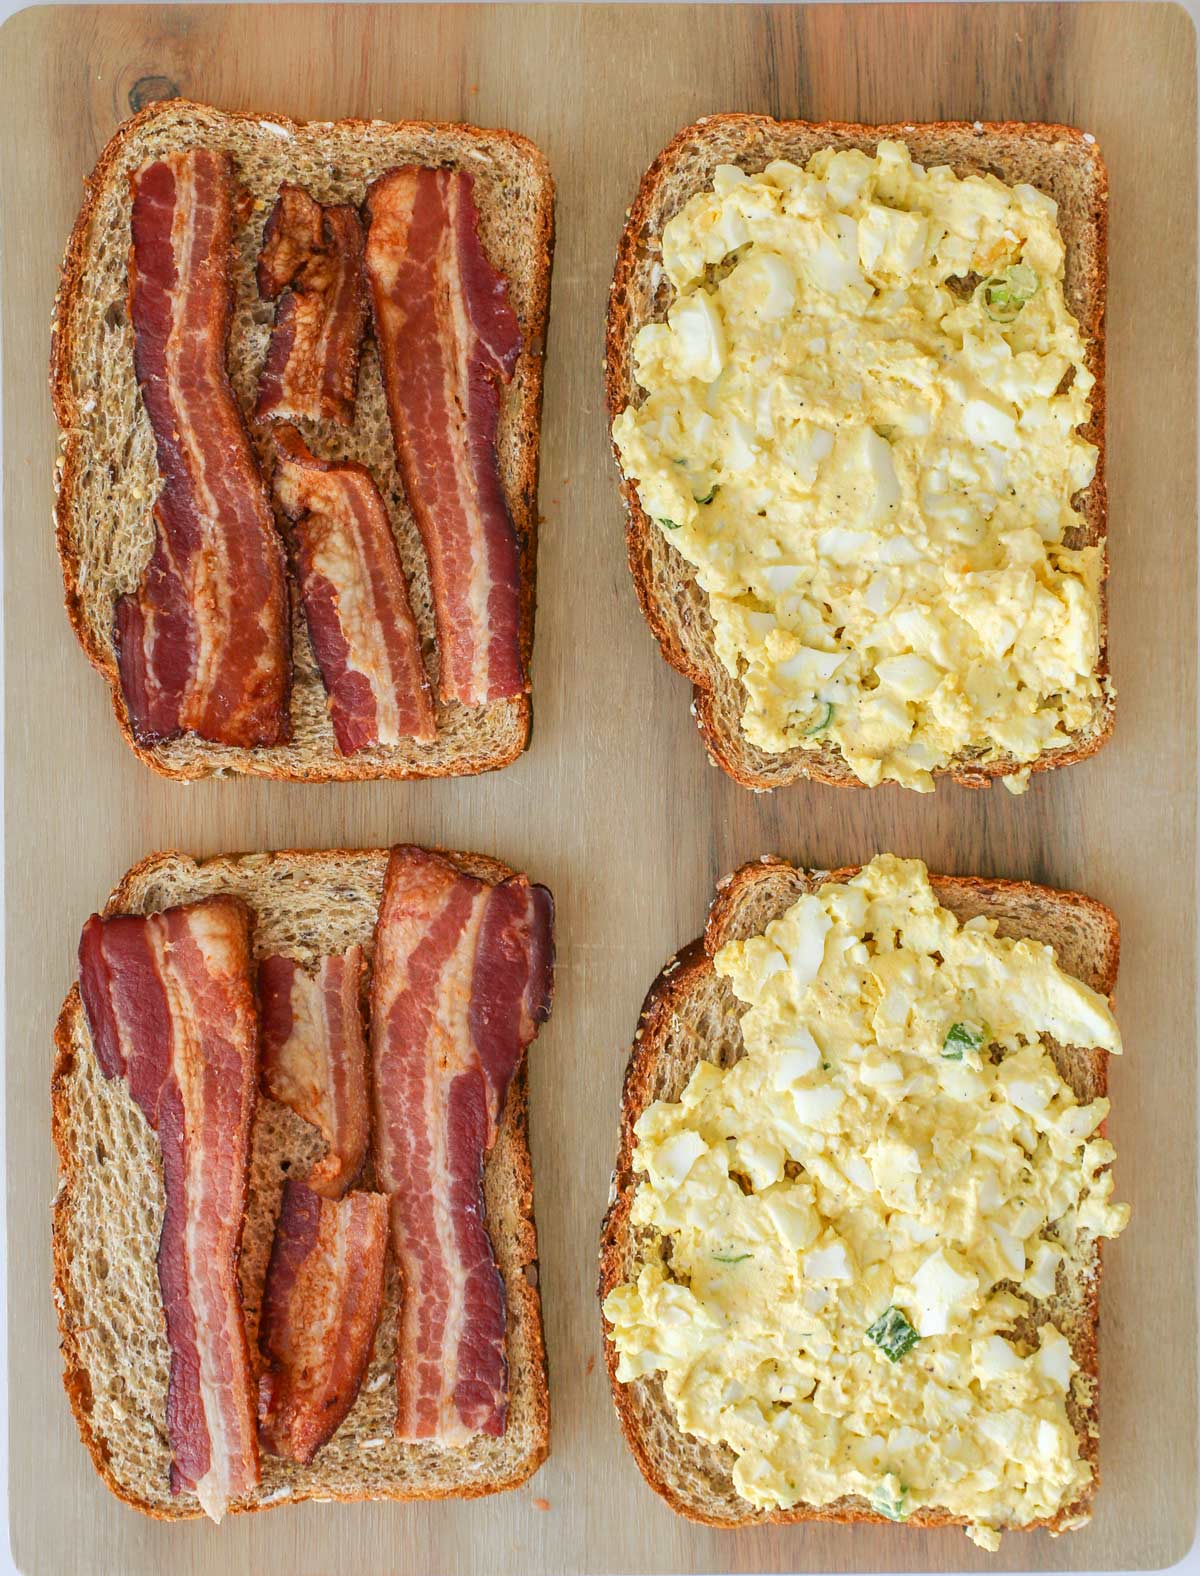 two sandwiches laid open, bacon on one side, egg salad on the other.